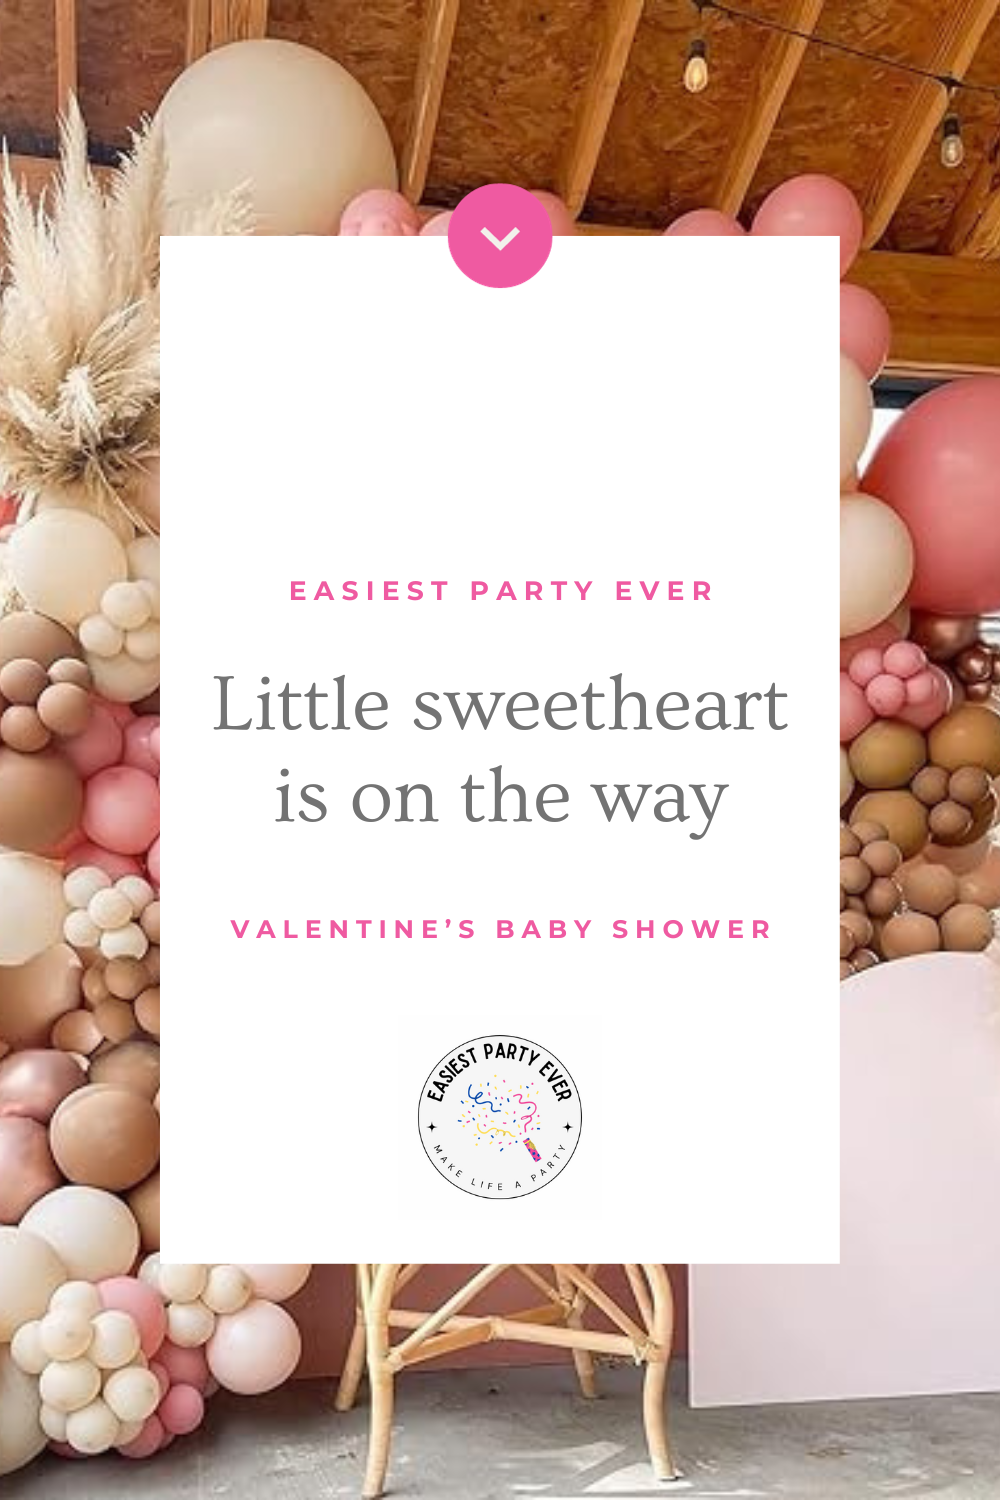 A little sweetheart is on the way: Valentine’s baby shower